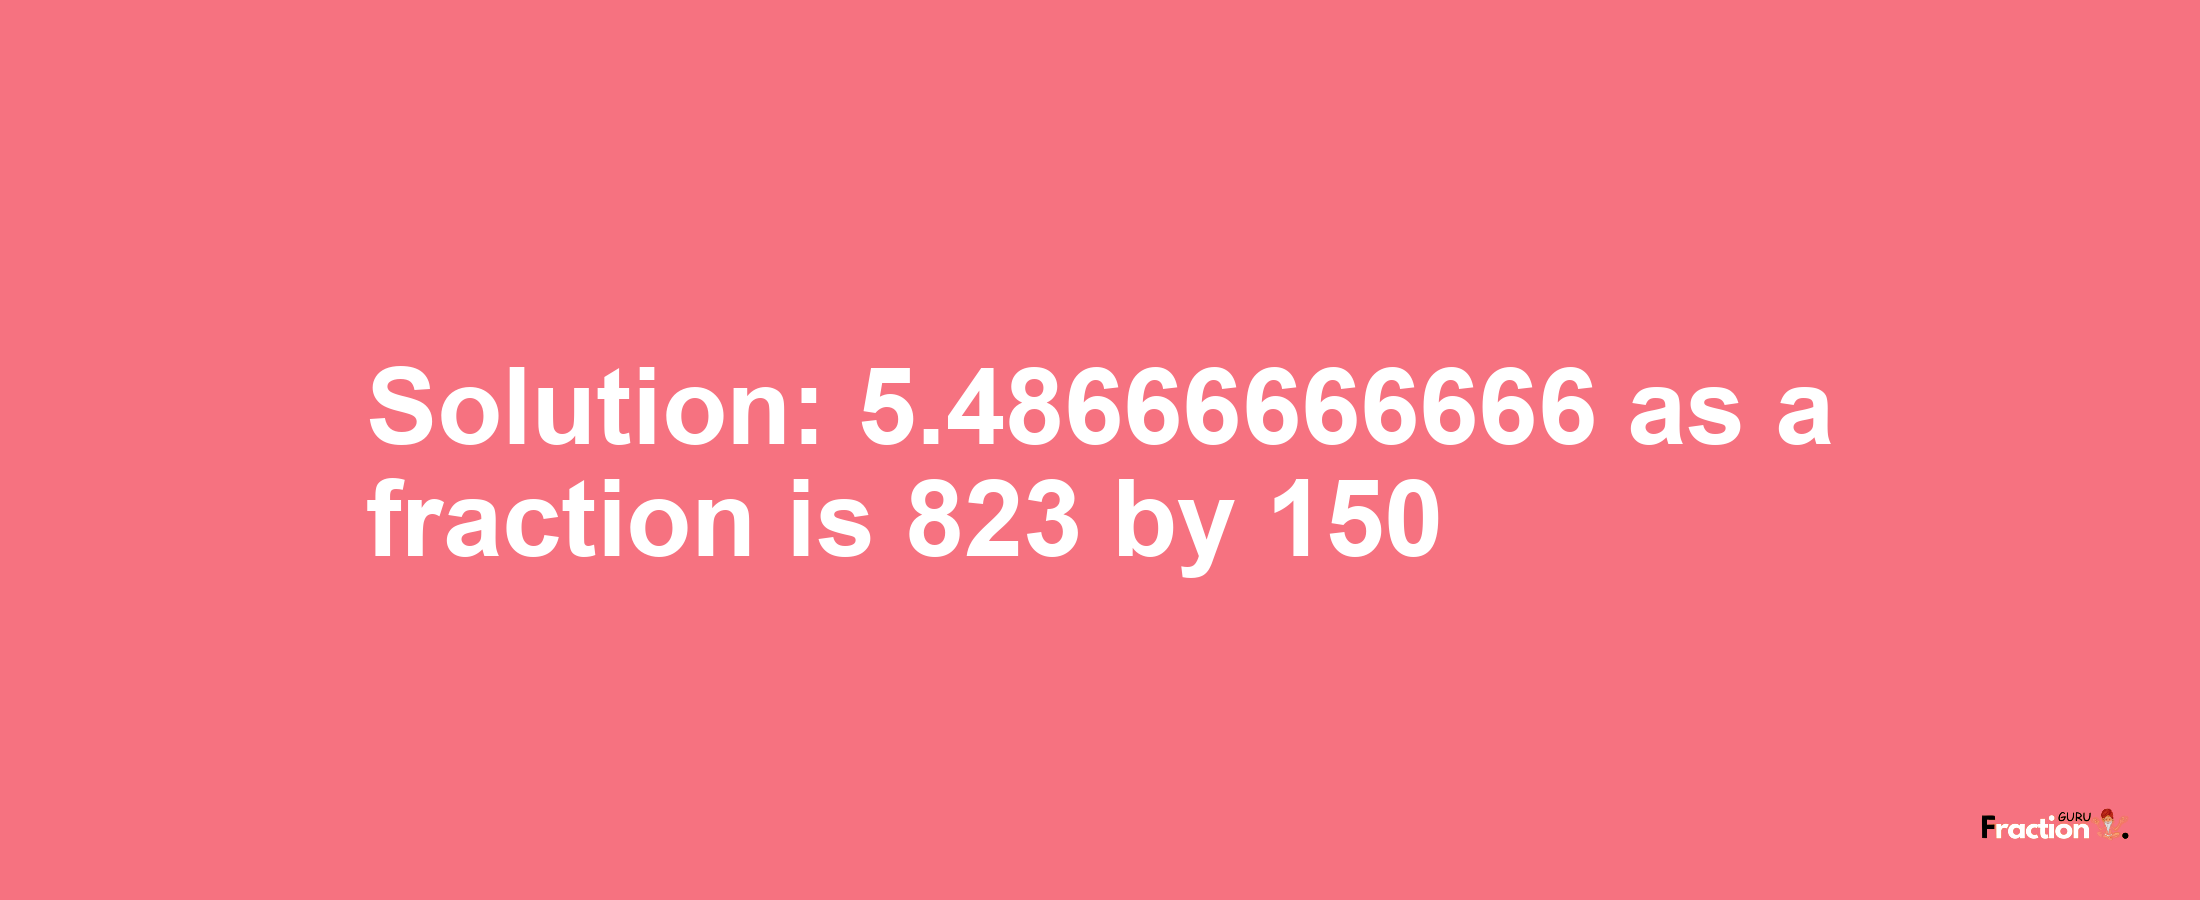 Solution:5.48666666666 as a fraction is 823/150